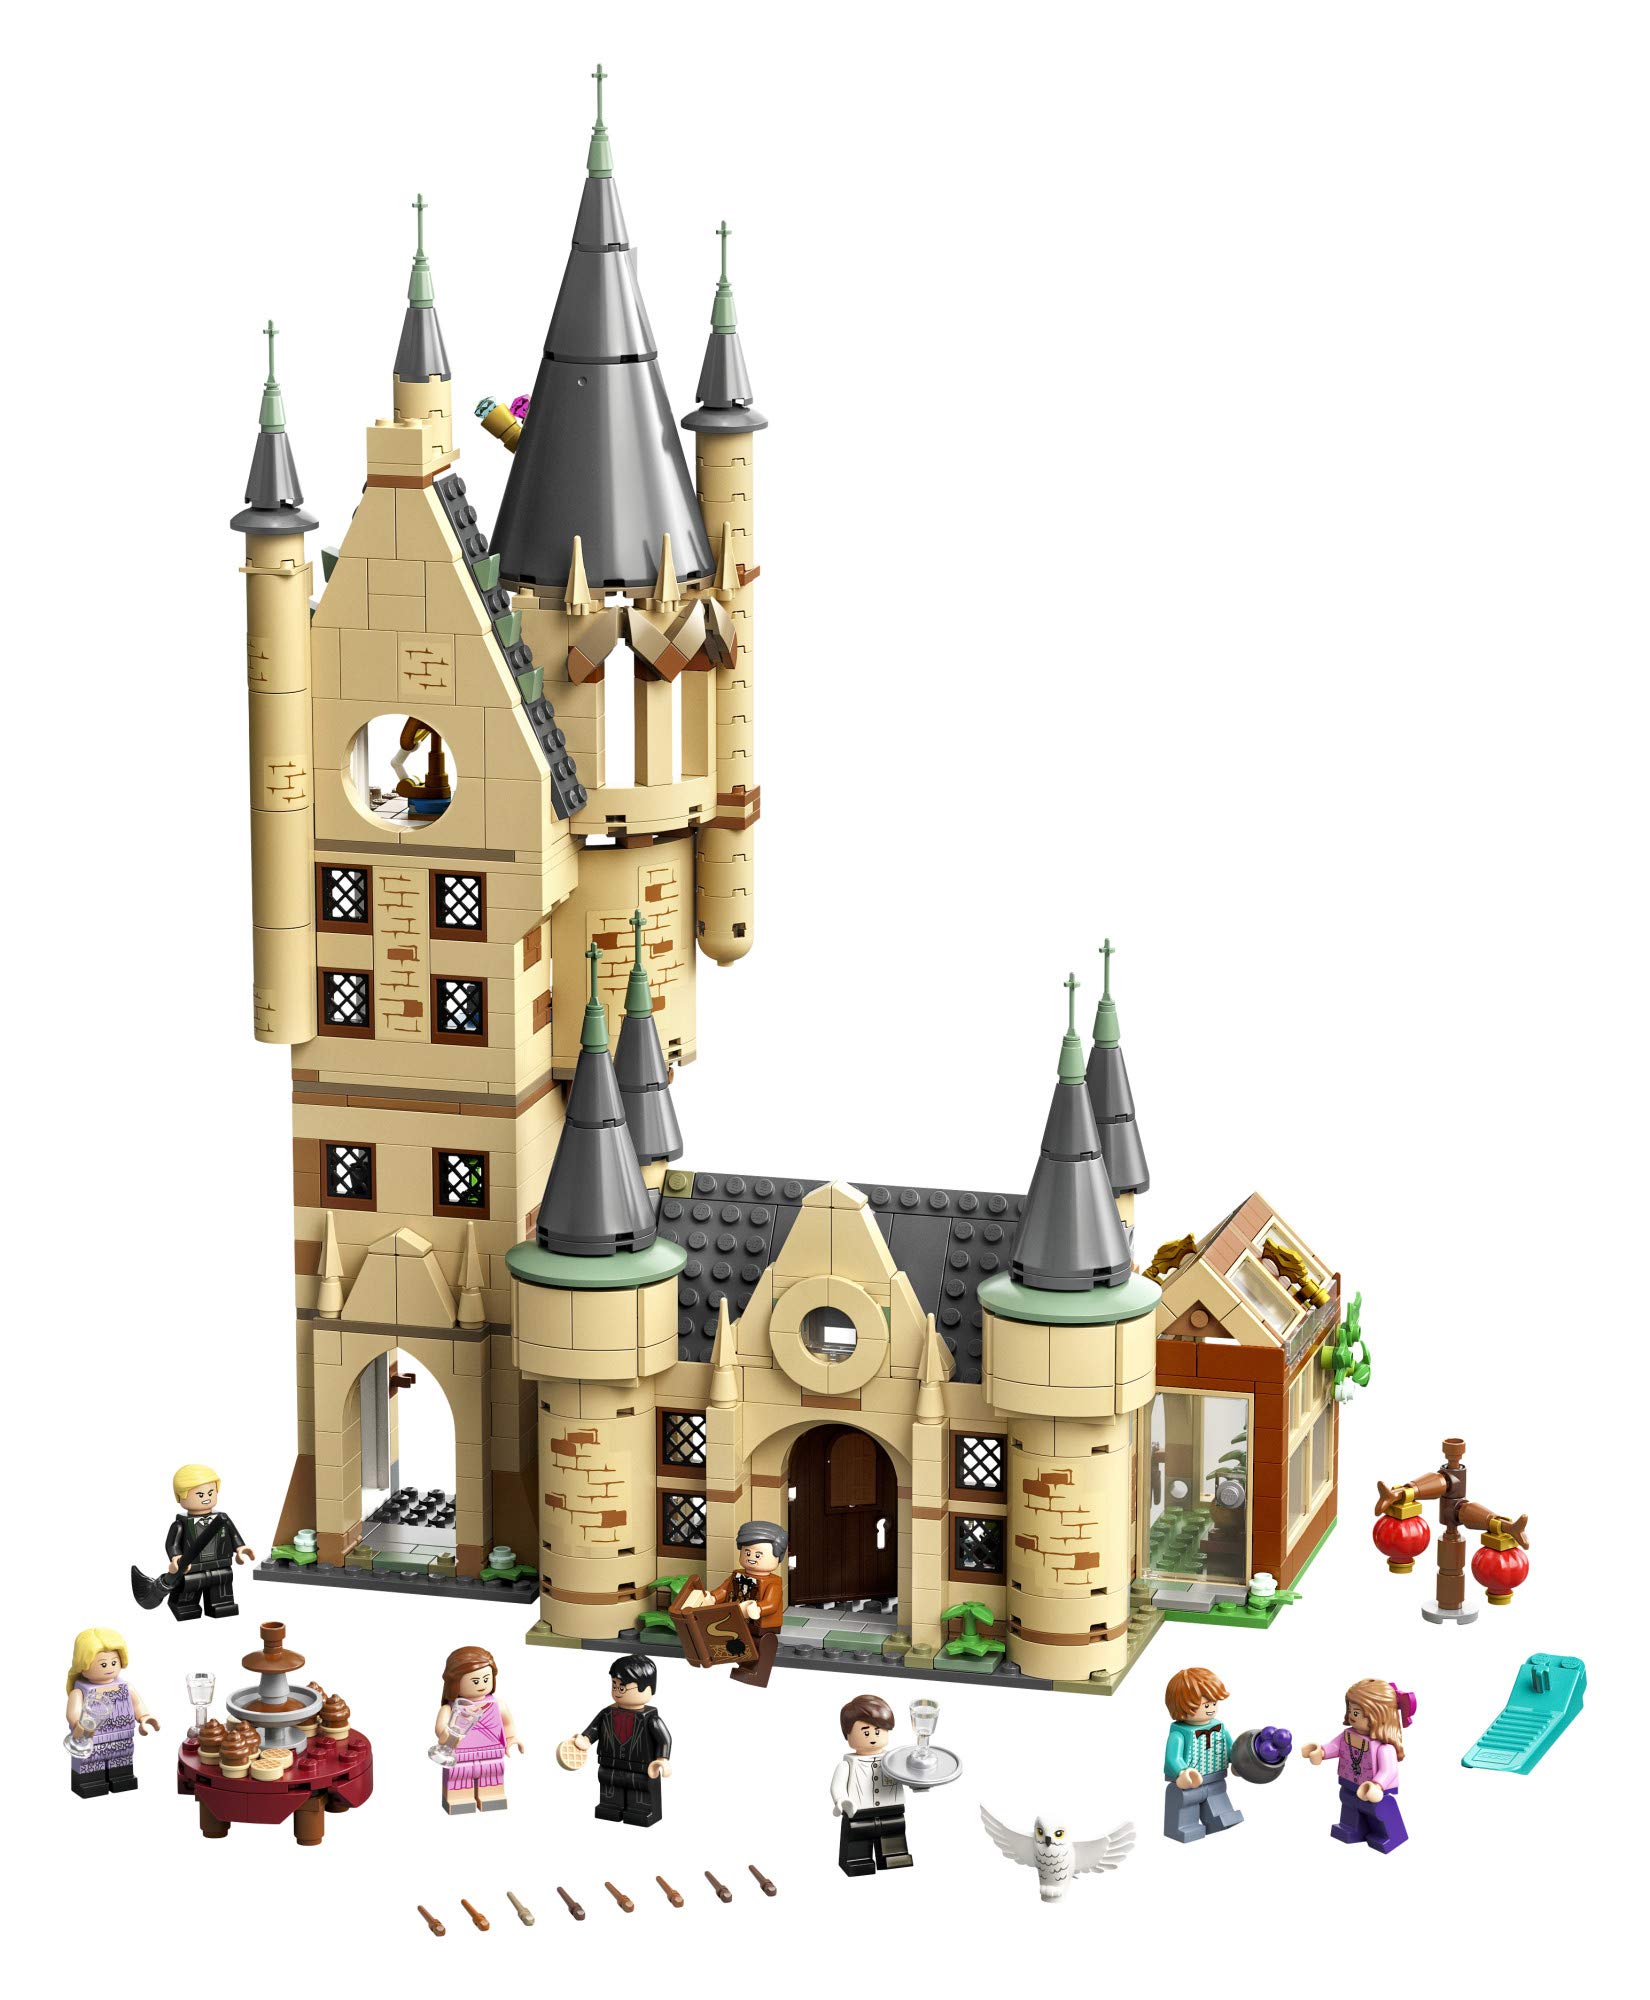 LEGO Harry Potter Hogwarts Astronomy Tower 75969 Building Toy Set for Kids, Boys, and Girls Ages 9+ (971 Pieces)